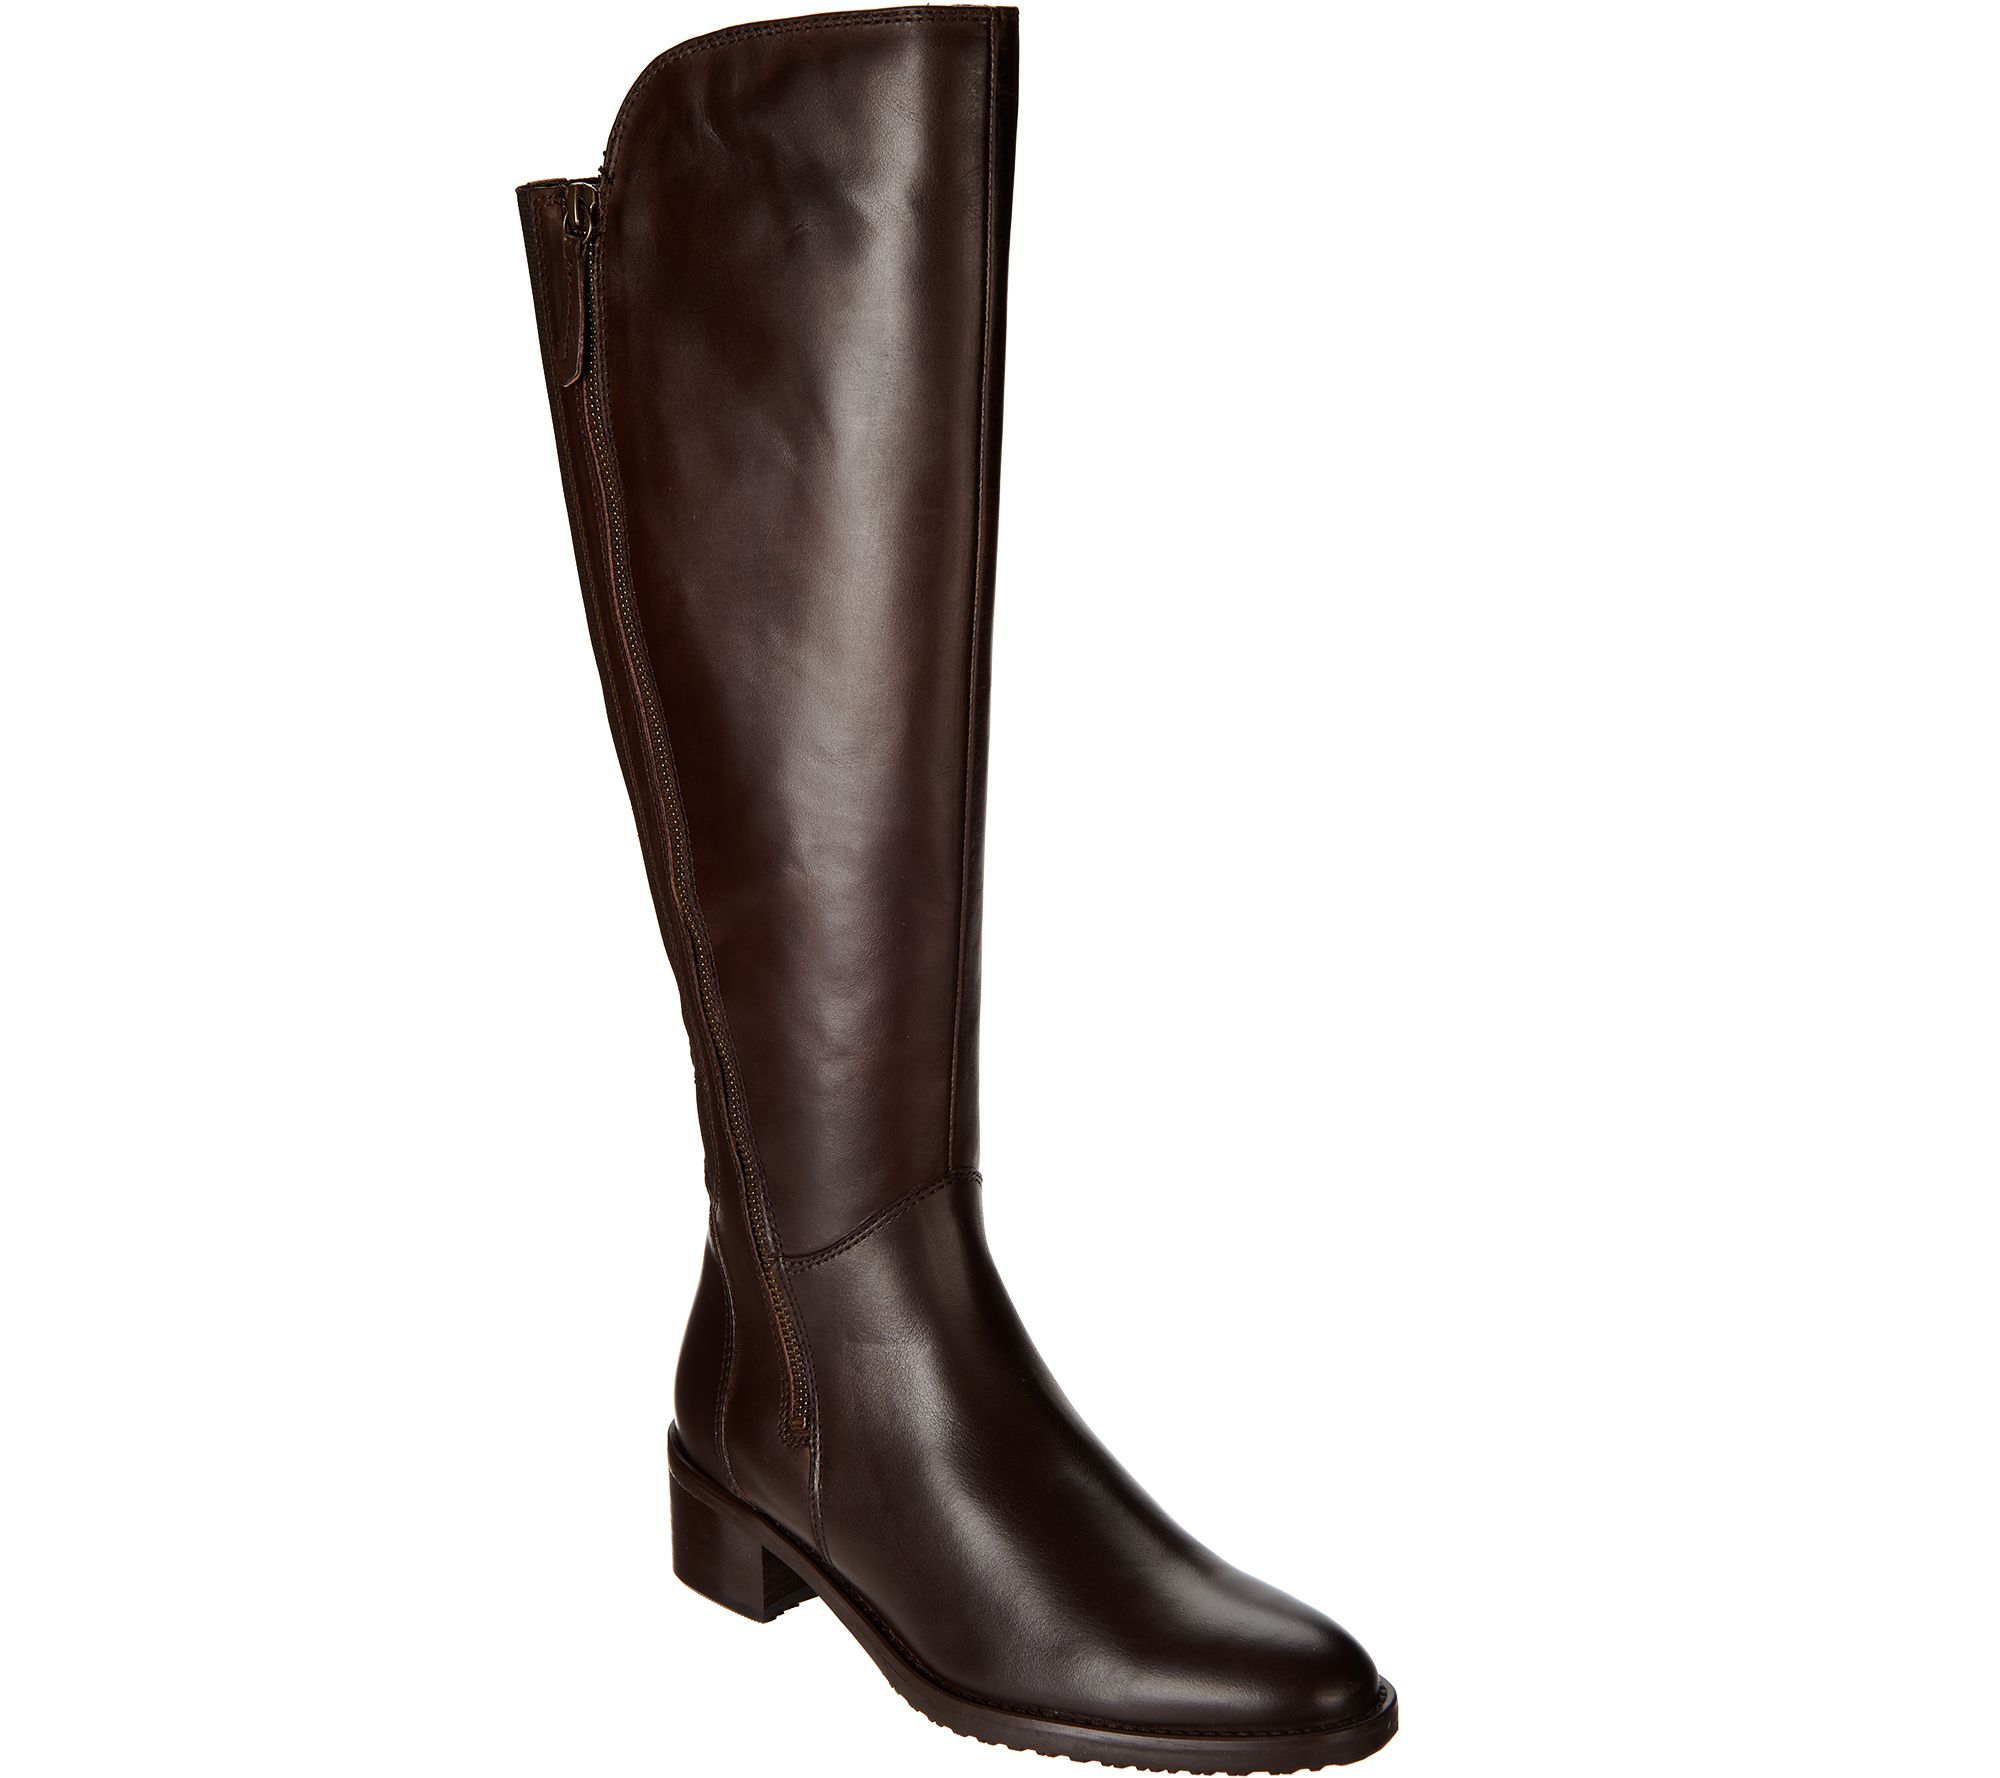 Clarks Artisan Leather Riding Boots 